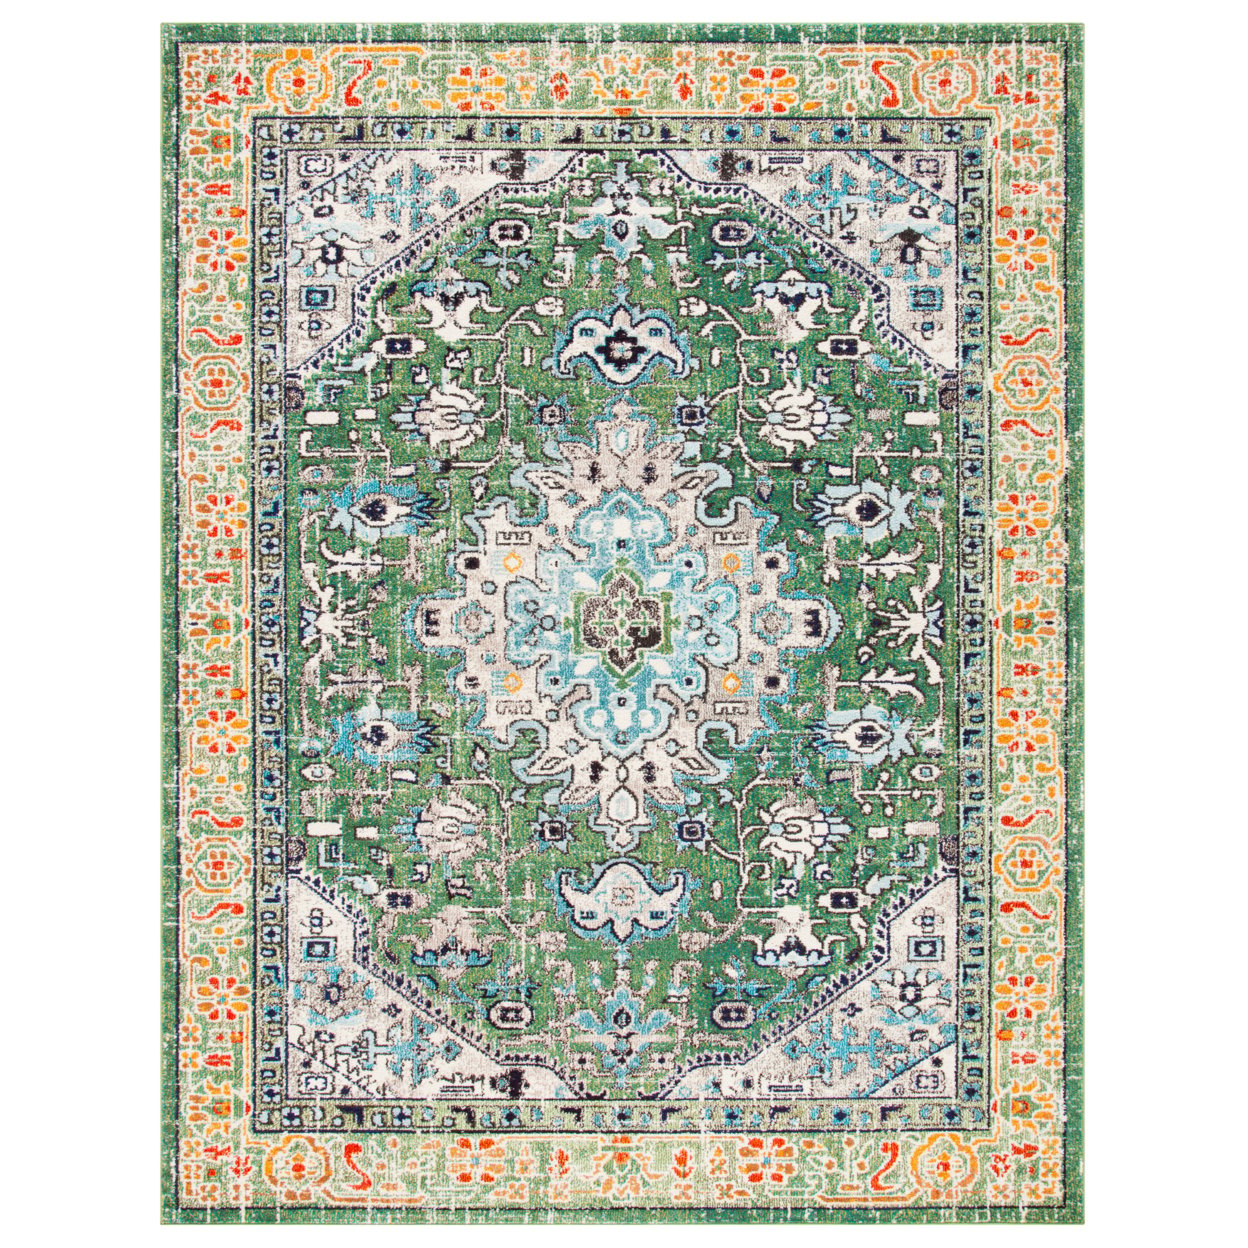 SAFAVIEH Madison Collection MAD474Y Green / Turquoise Rug - 2' 2 X 10'